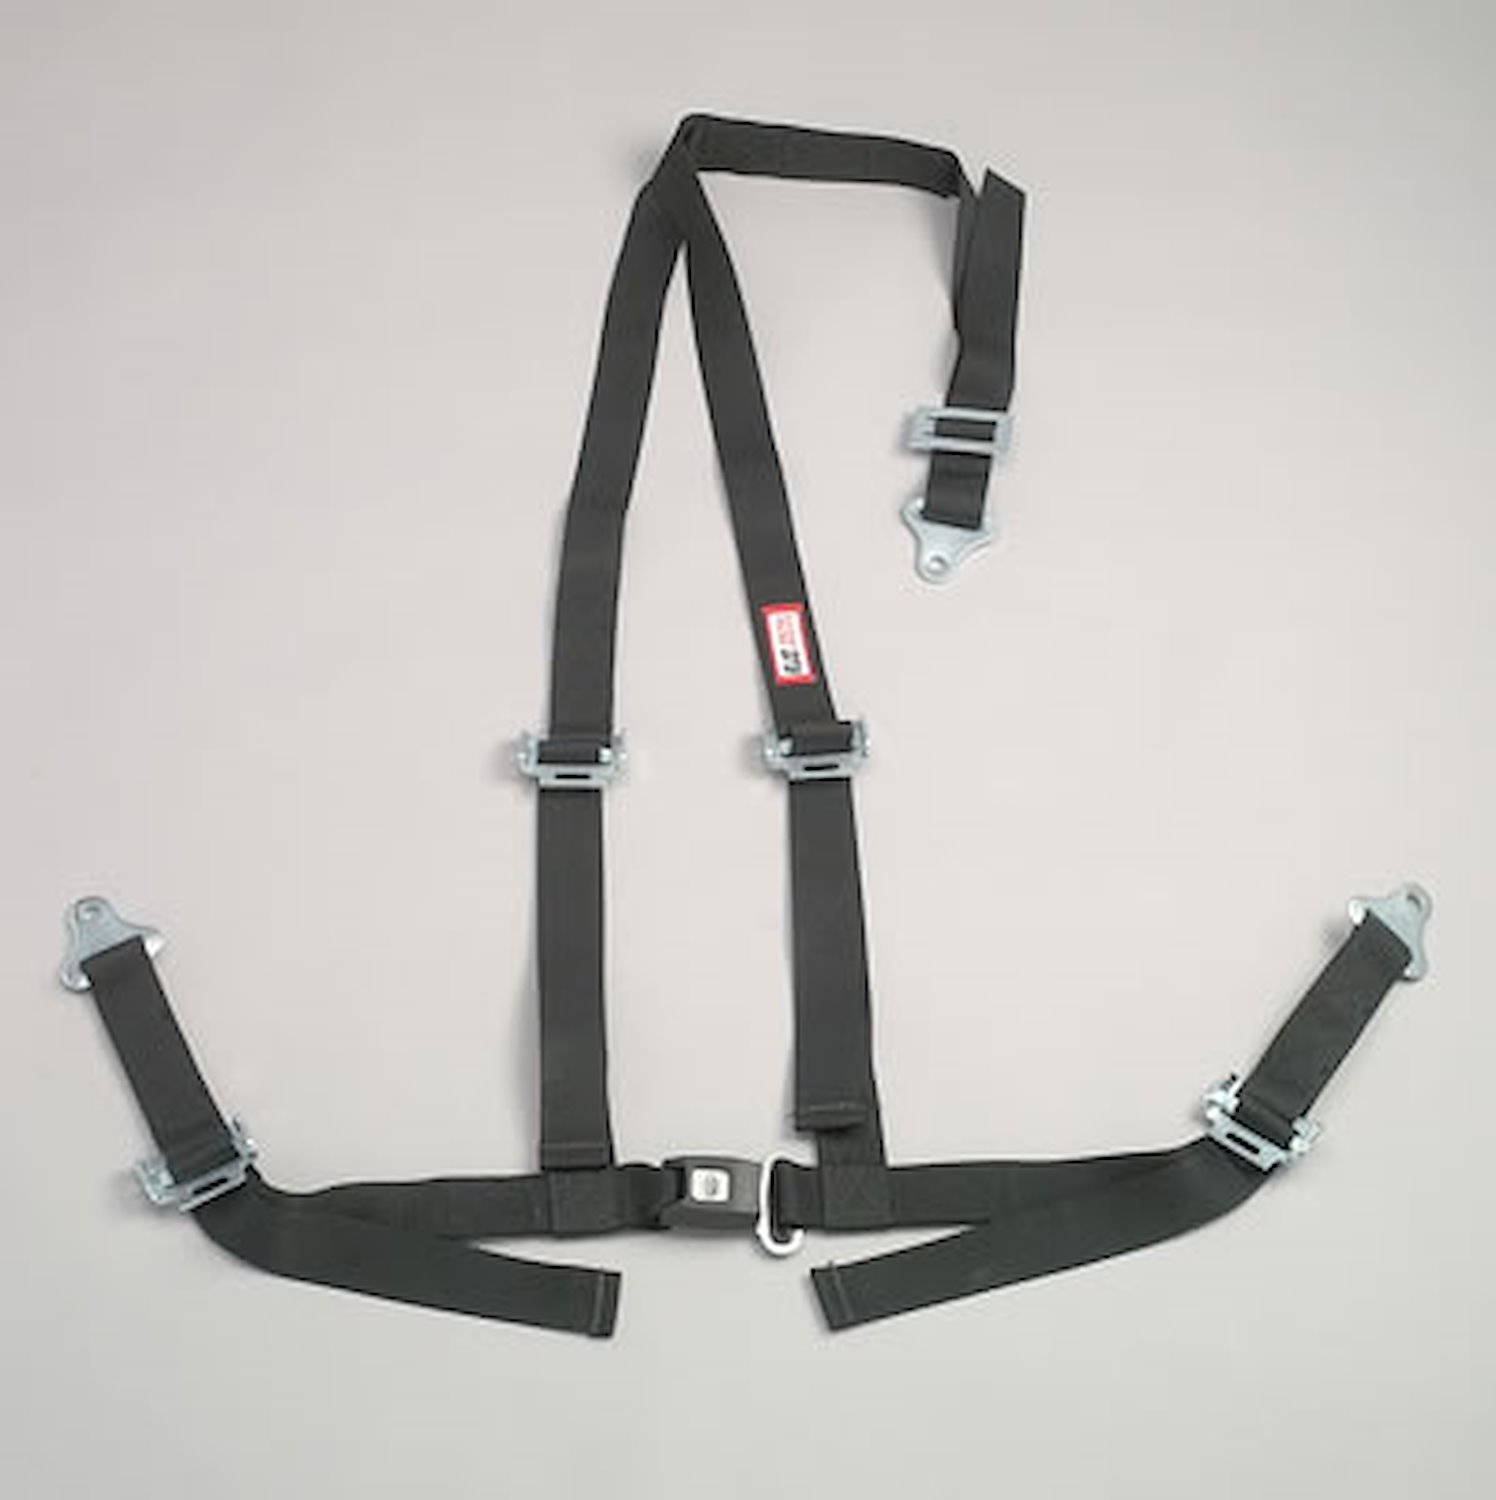 NON-SFI B&T HARNESS 2 PULL DOWN Lap Belt SNAP 2 S. H. V ROLL BAR Mount BOLT w/STERNUM STRAP RED